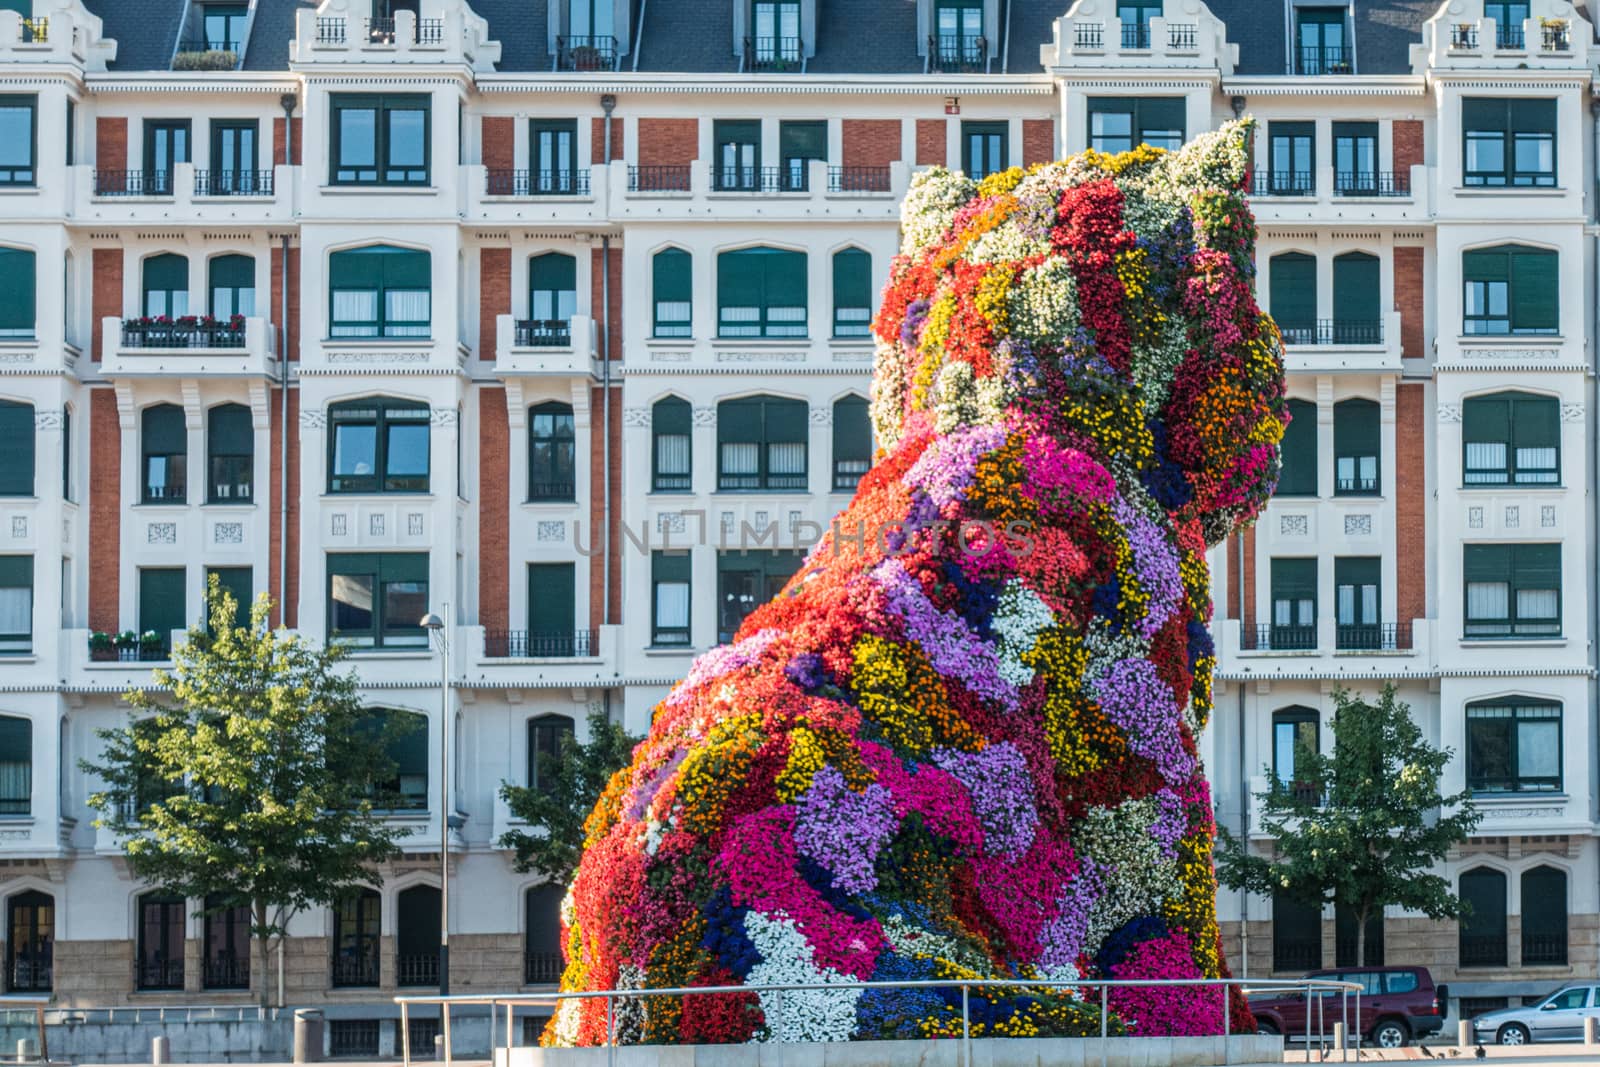 statue of a giant dog covered by flowers